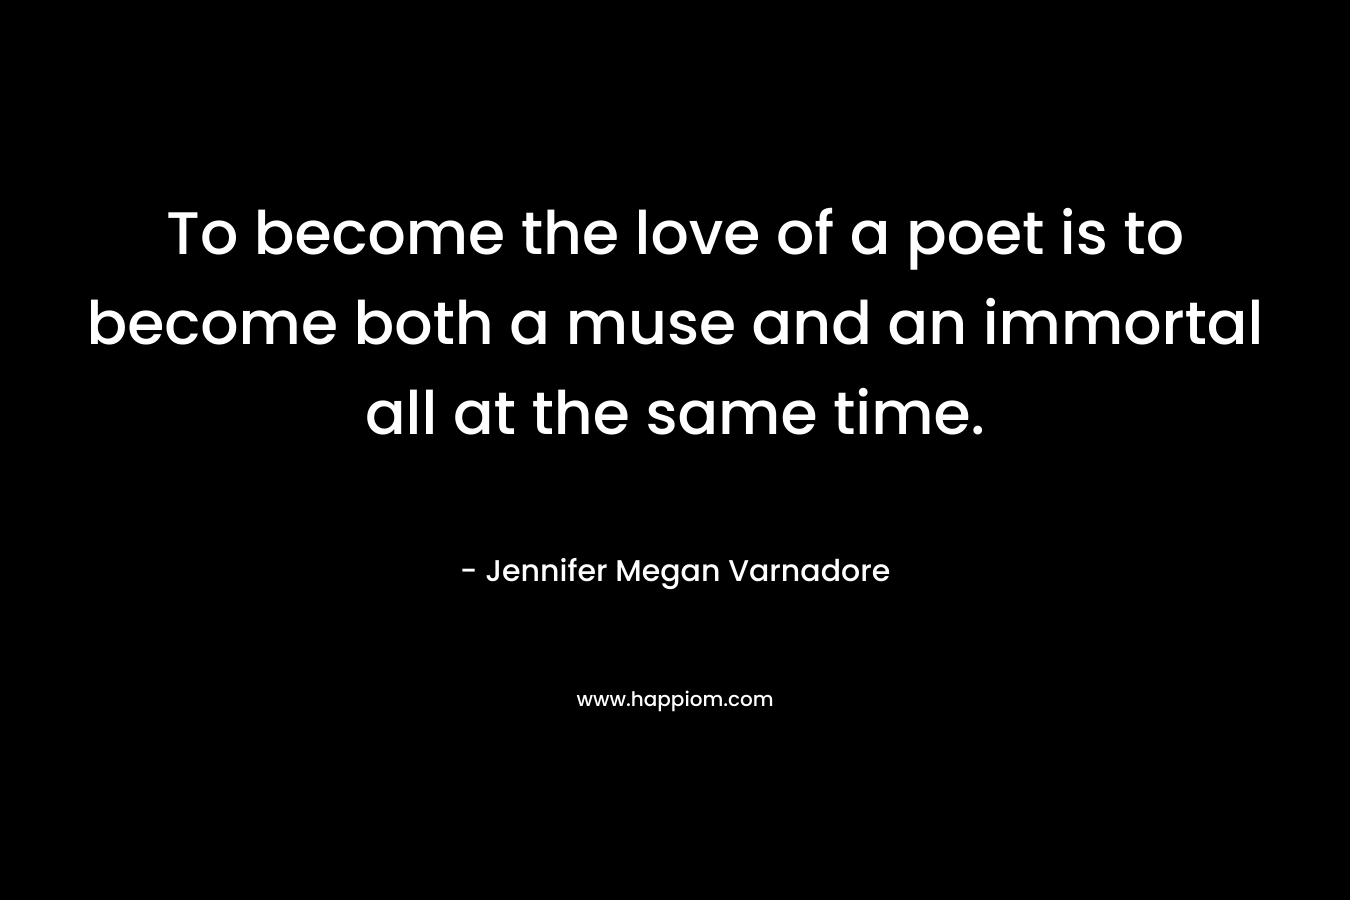 To become the love of a poet is to become both a muse and an immortal all at the same time. – Jennifer Megan Varnadore